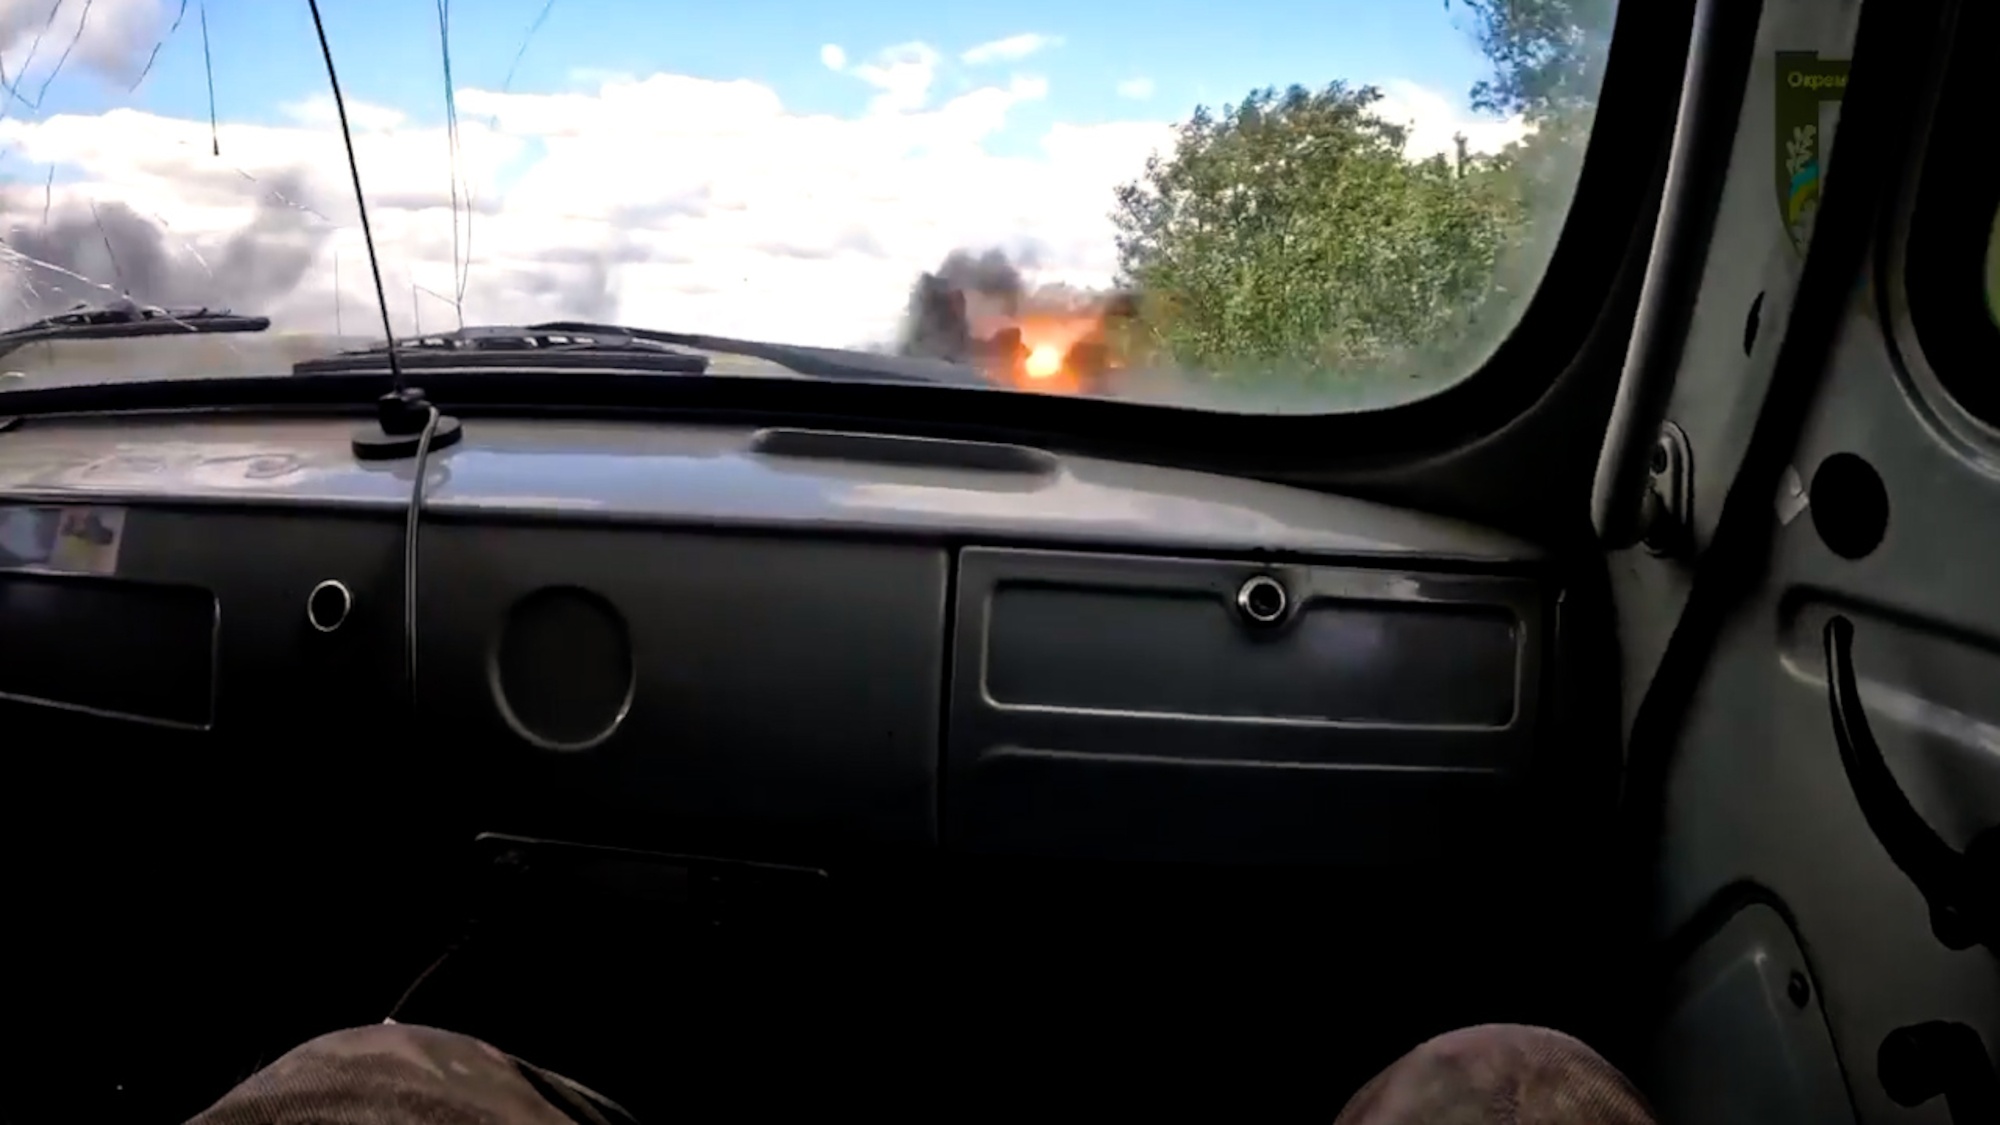 Read more about the article Harrowing Moment Ukrainian Soldiers Dodge Explosions While Evacuating Injured Troops